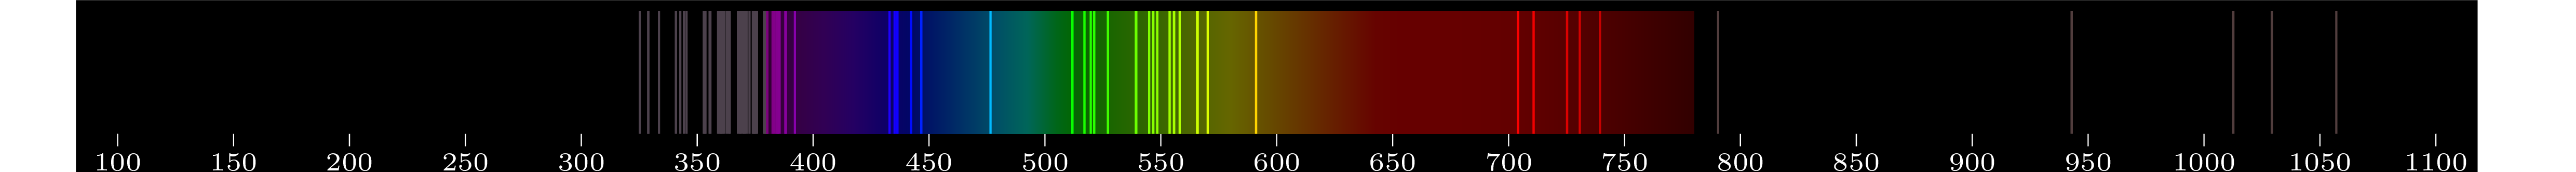 emmision spectra of element Bk